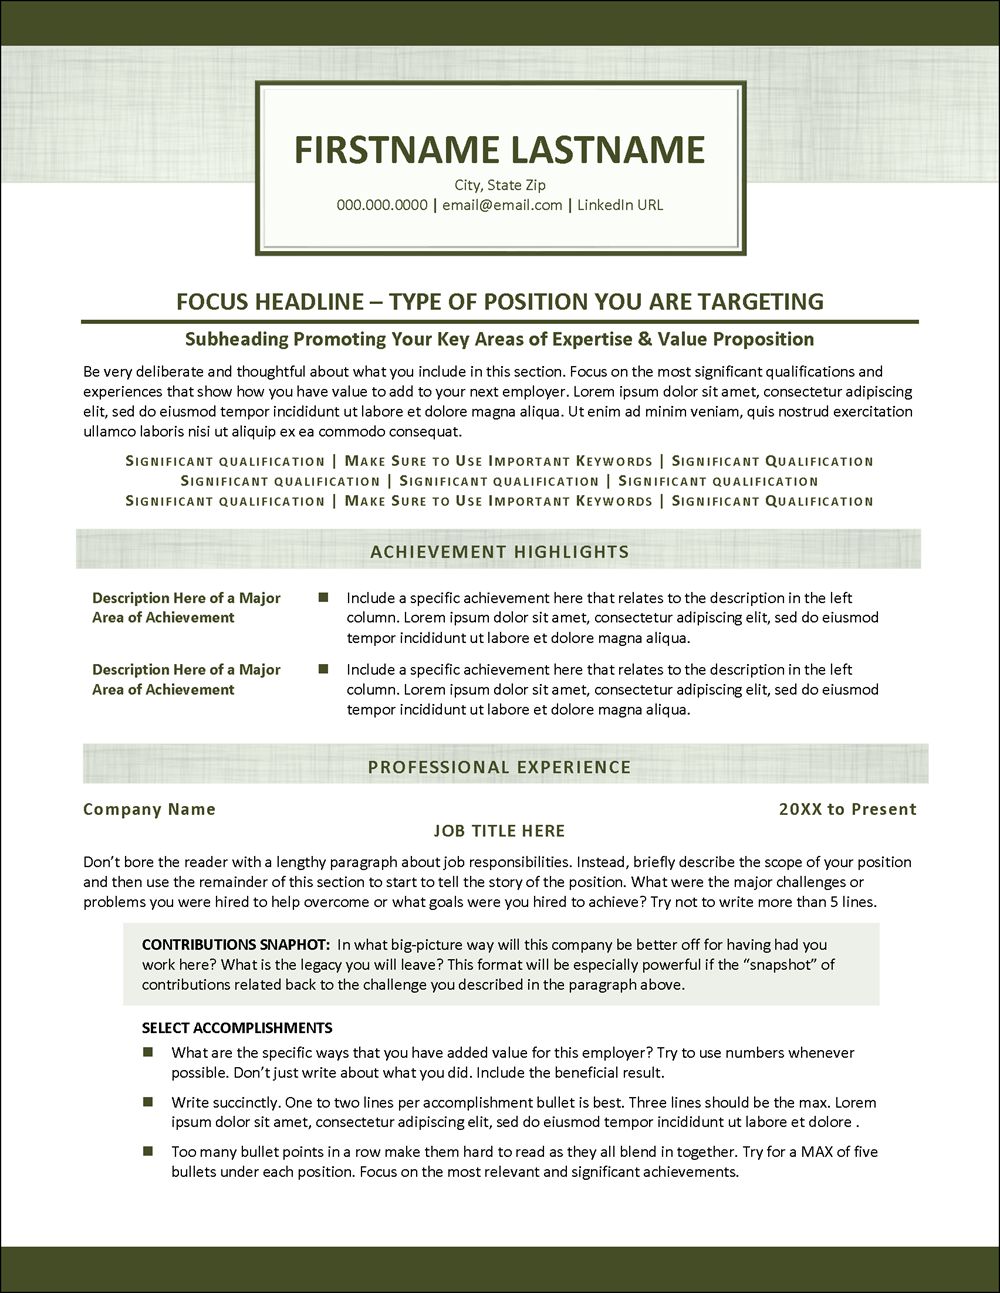 Resume Templates for Creative Resume Formats